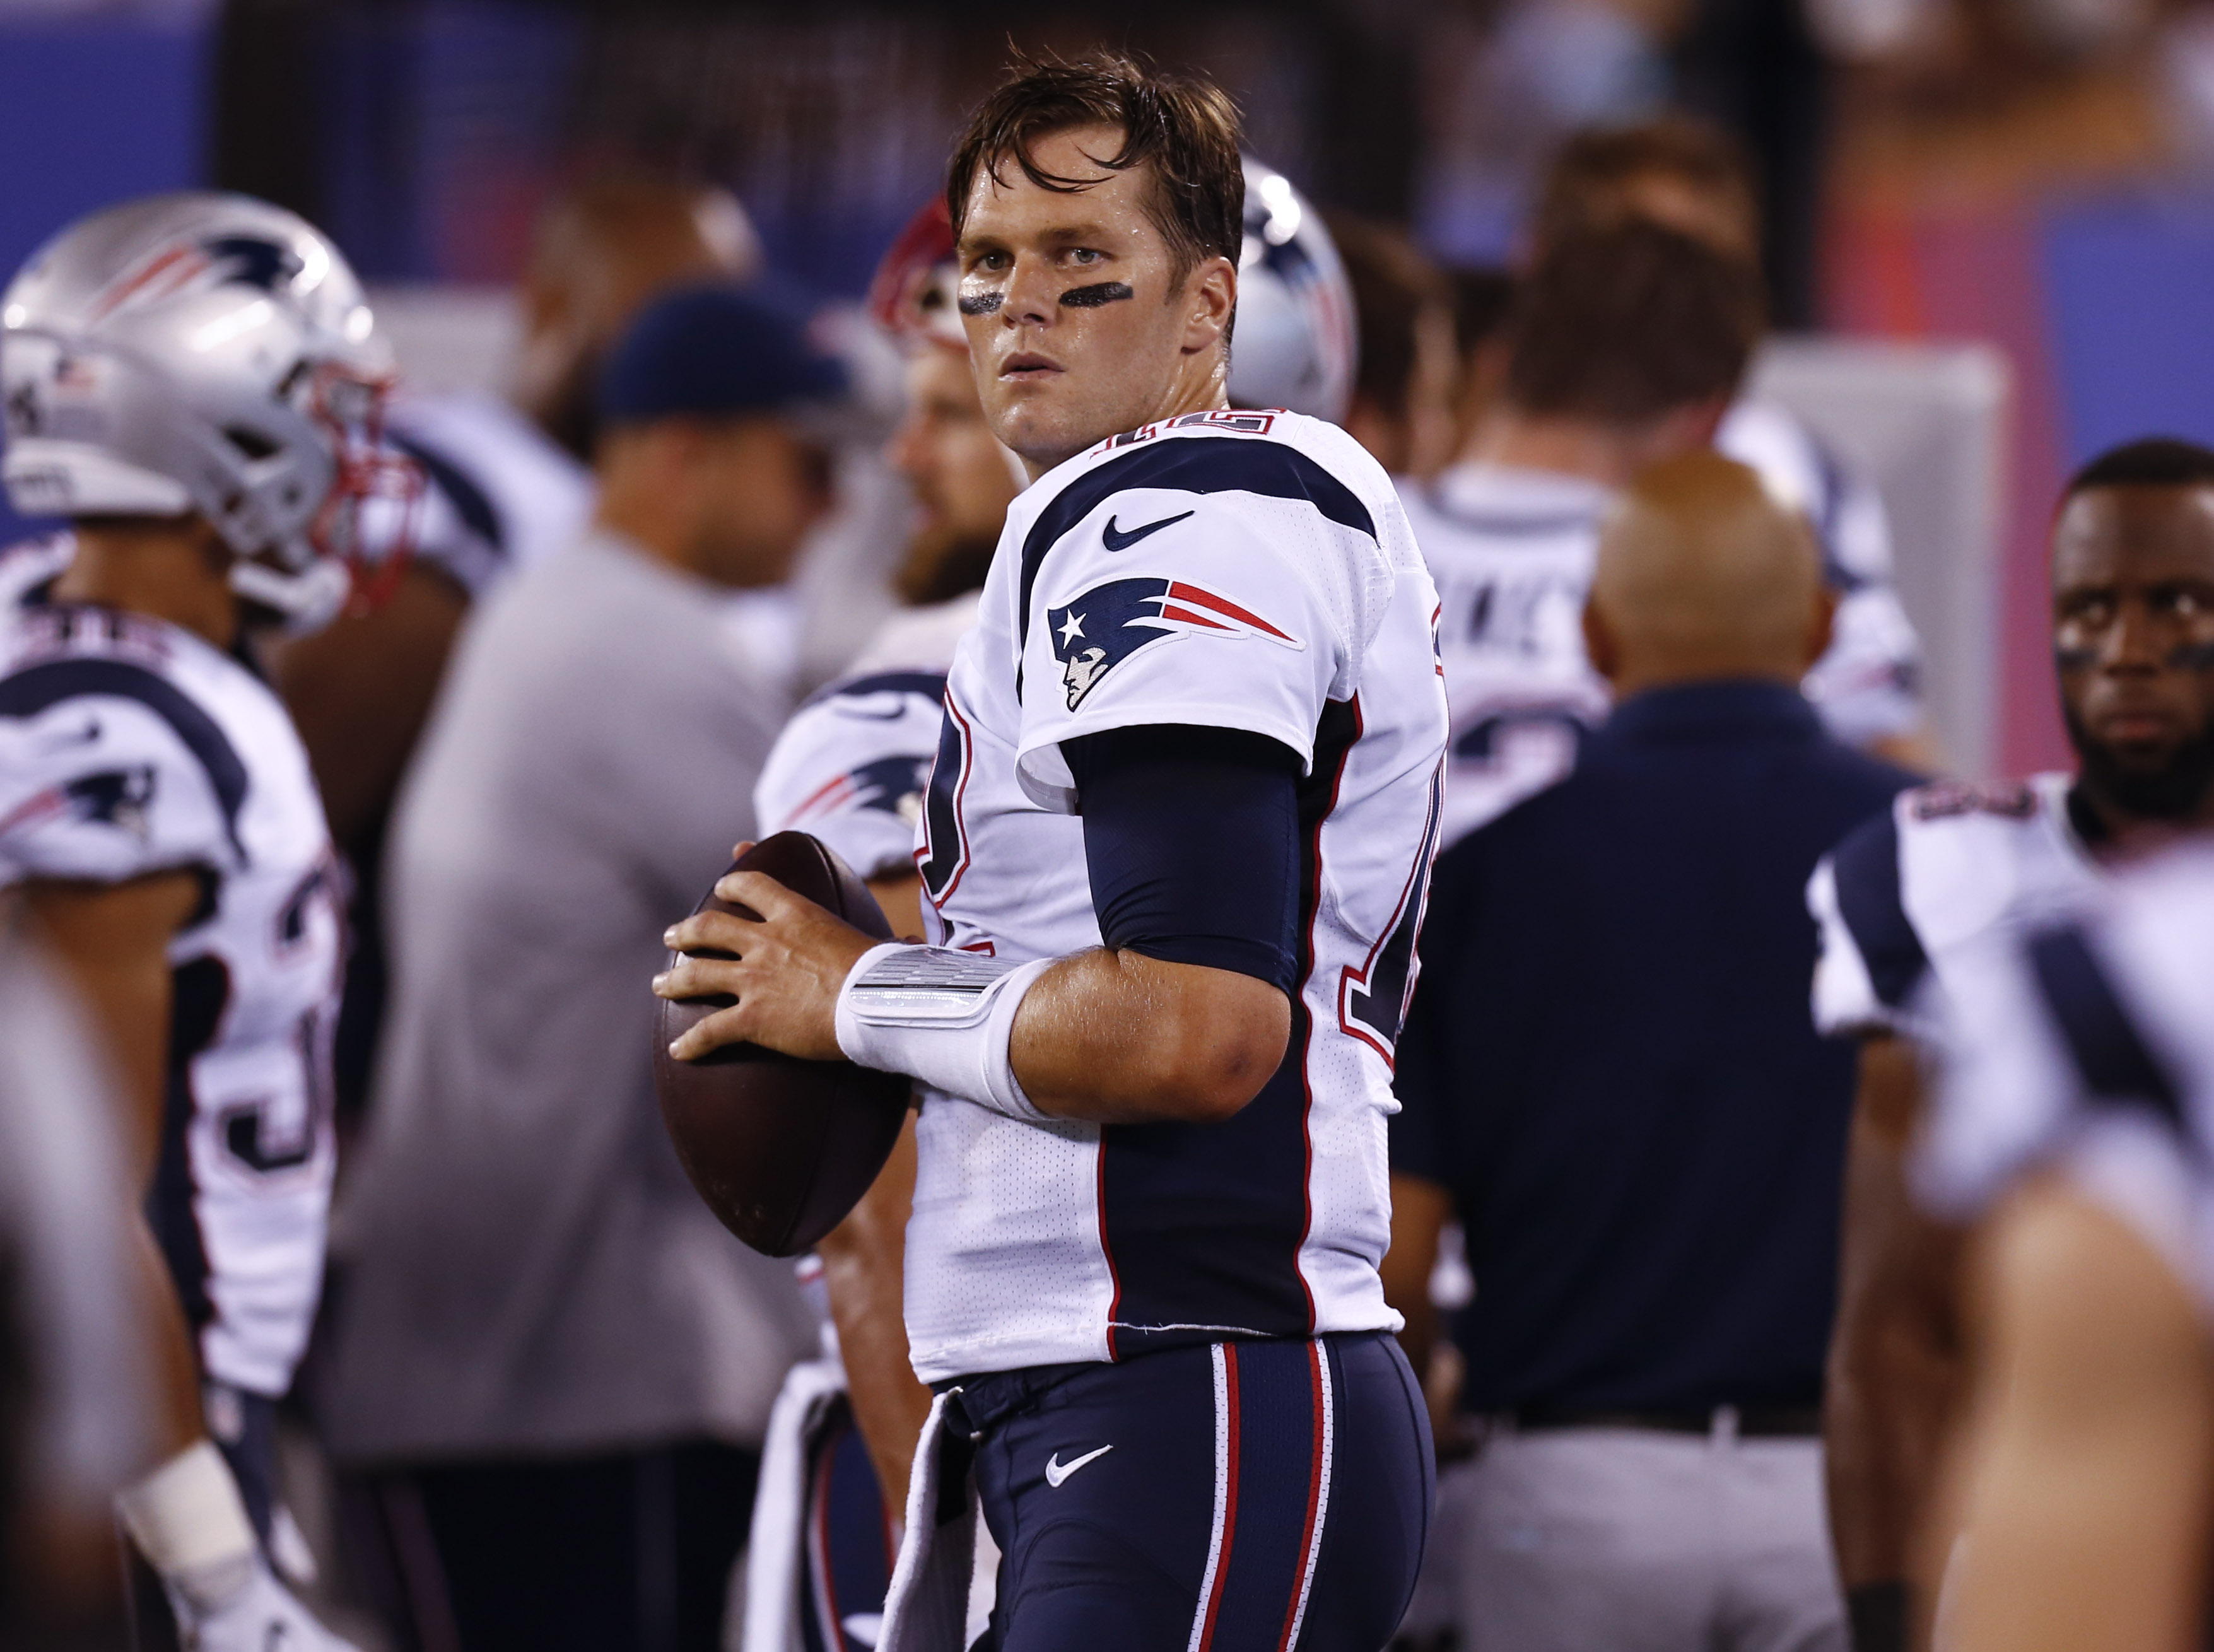 Sidelines: As New England Patriots QB Tom Brady goes, so does a favorite  jersey